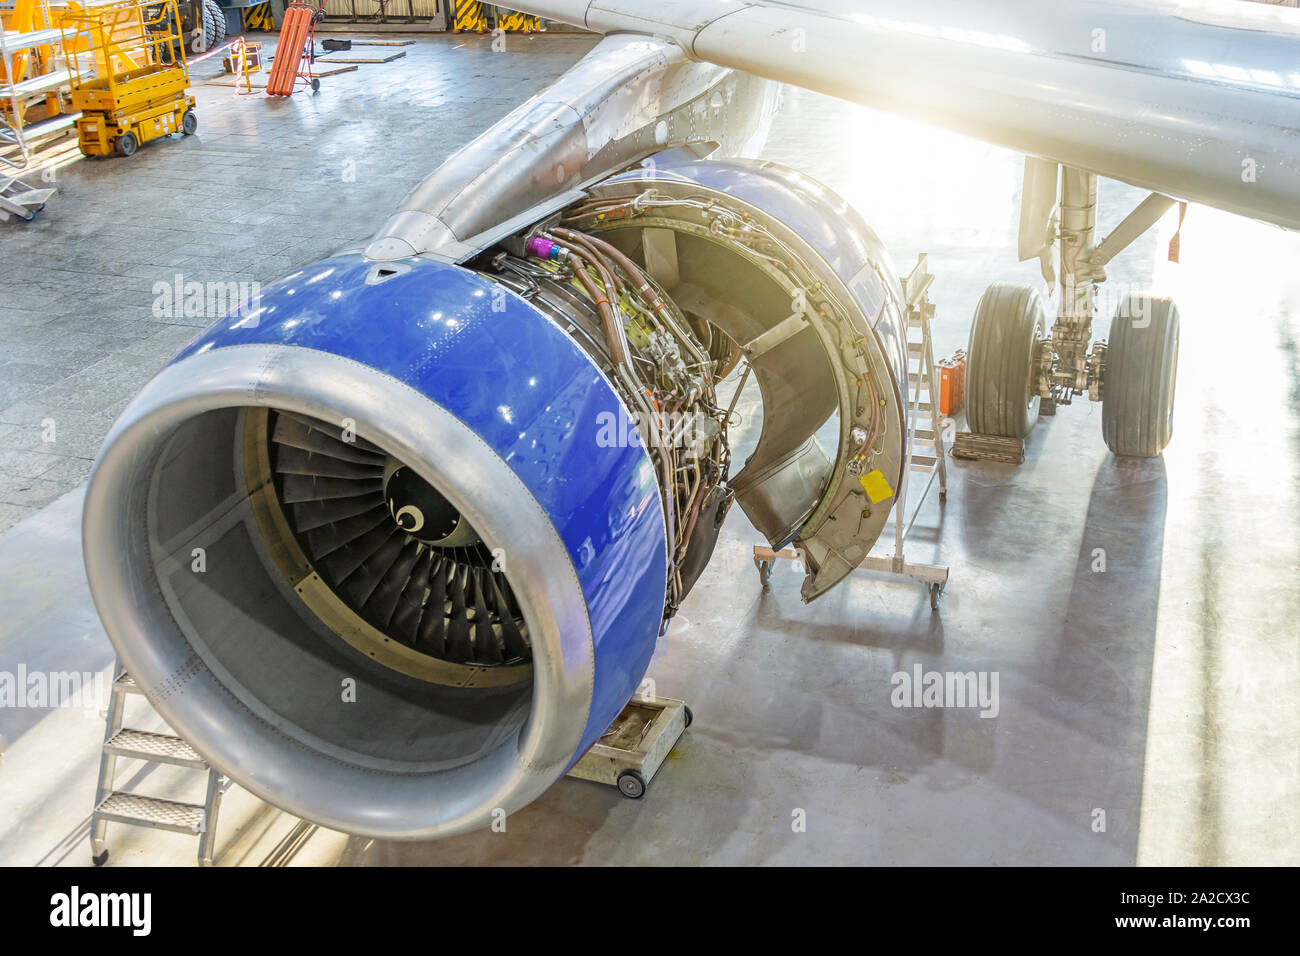 Airplane in the hangar for maintenance, view of the engine wing with the hood open Stock Photo